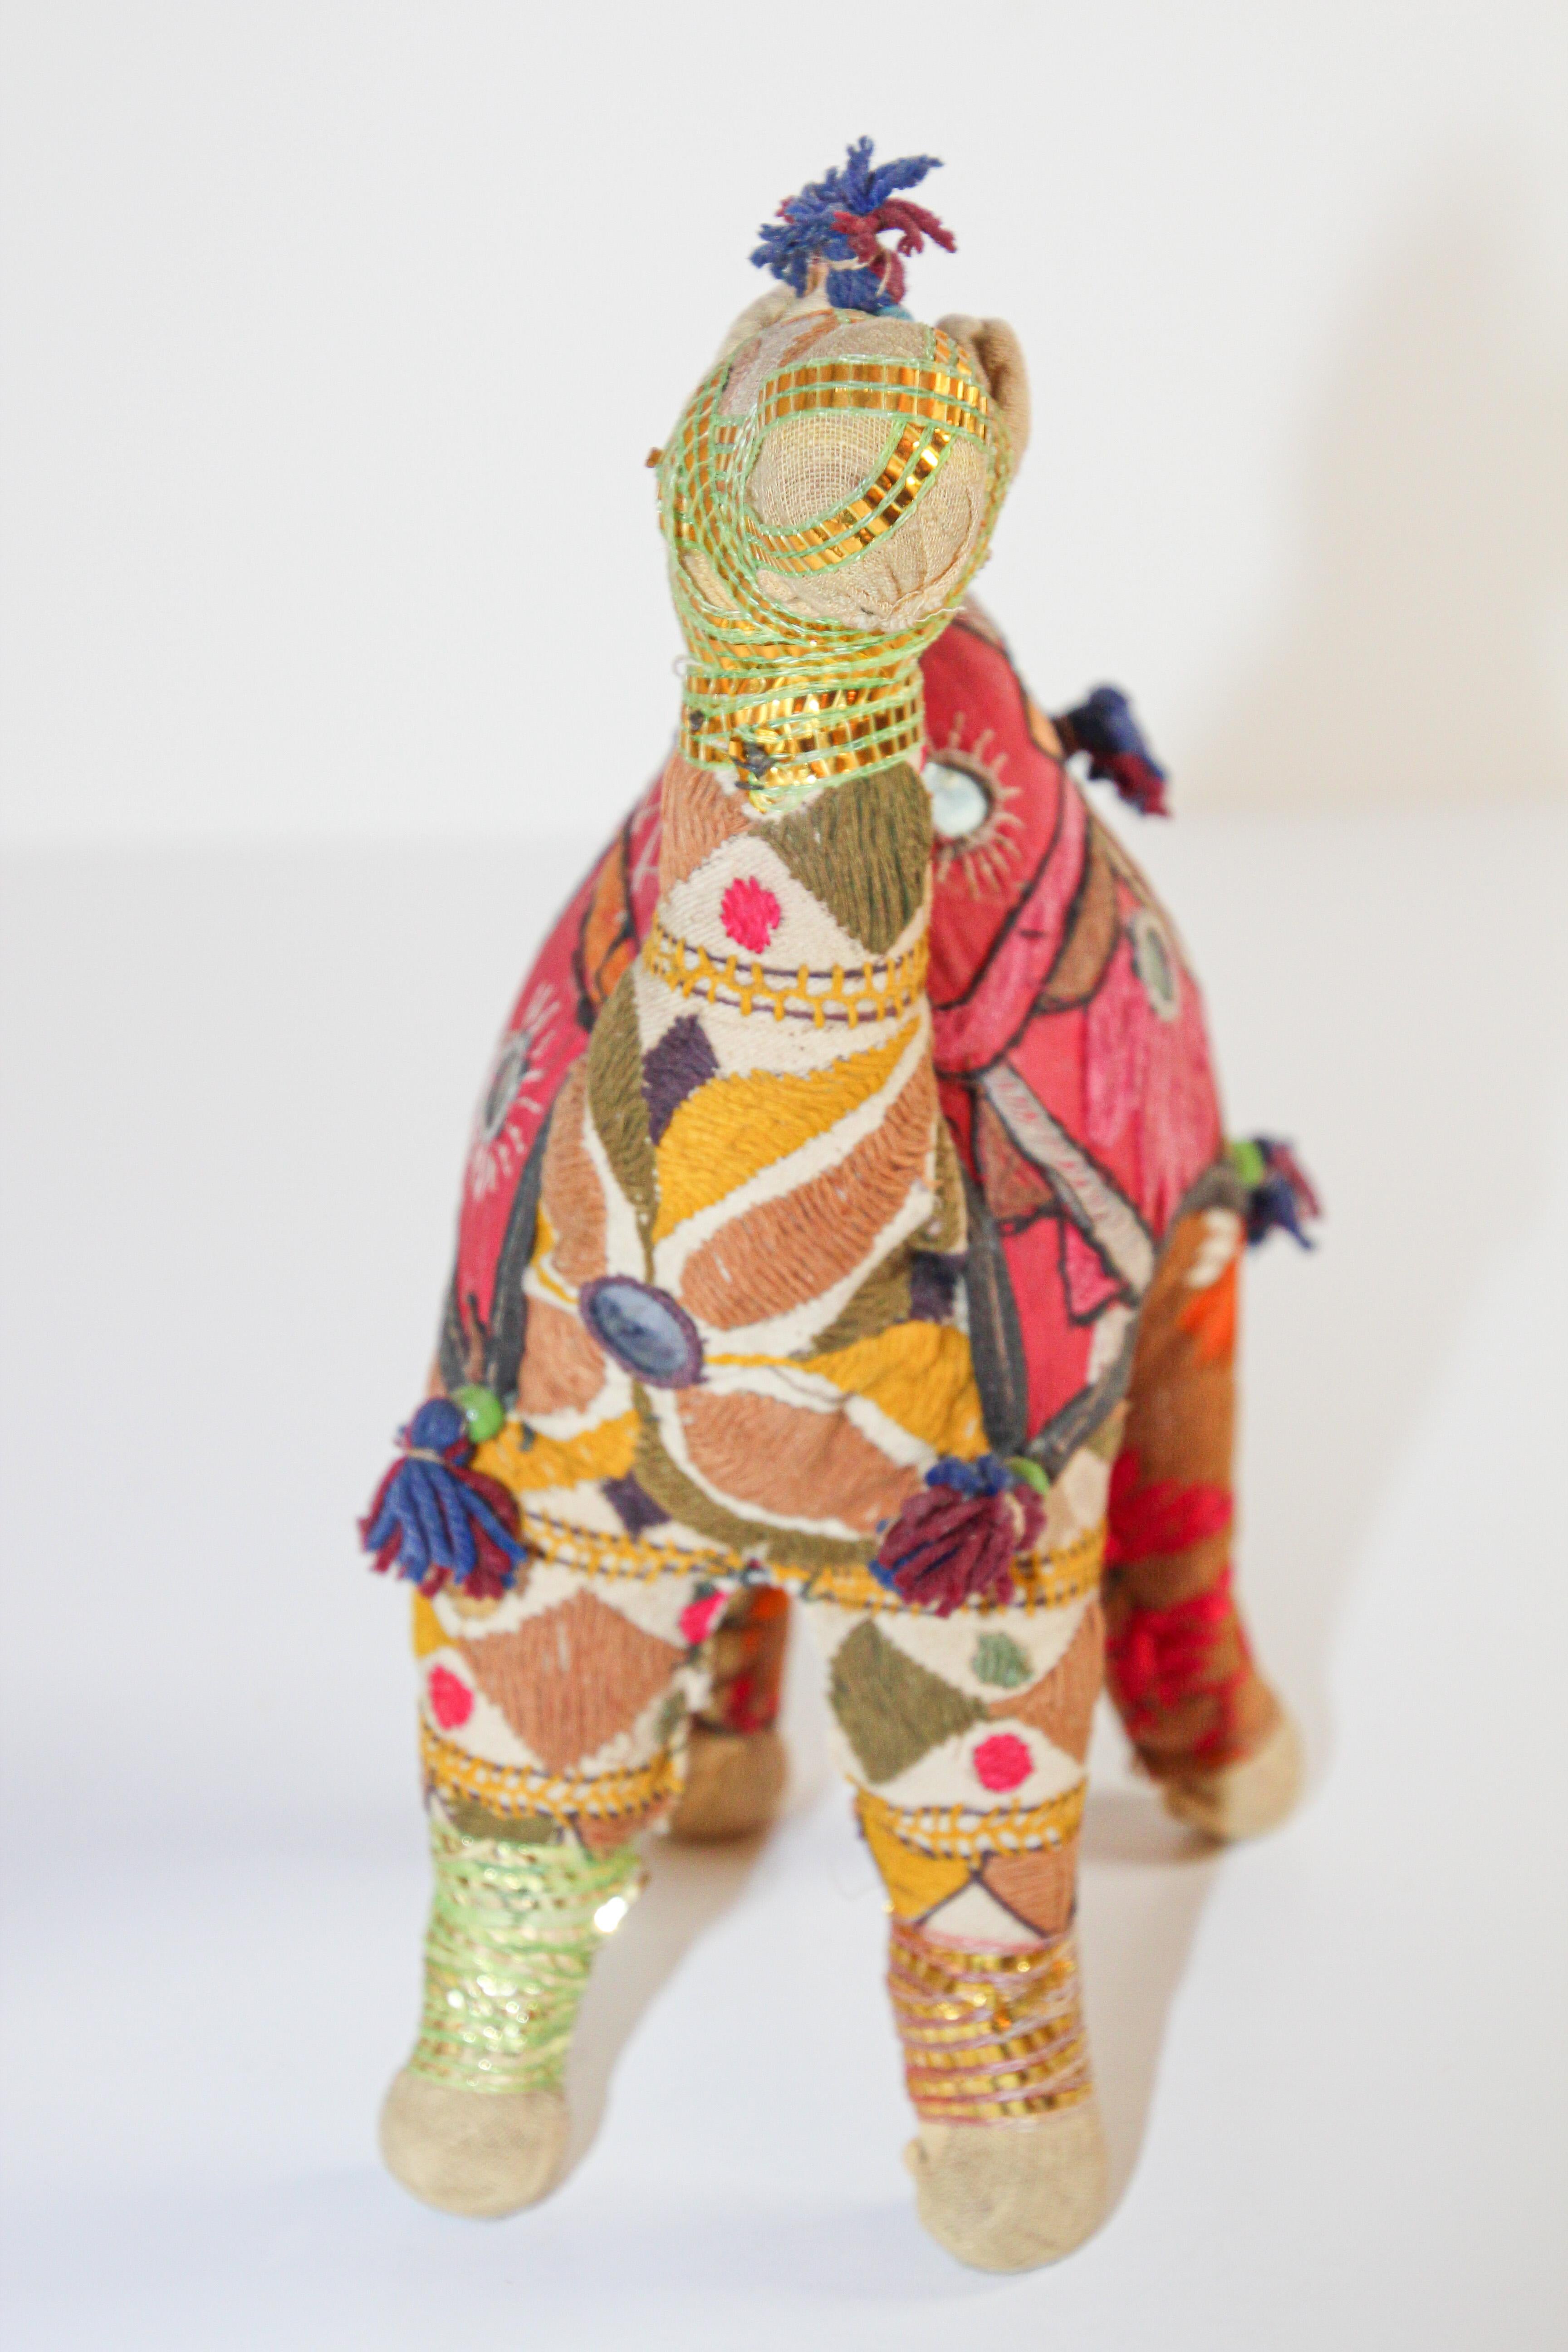 Fabric Handcrafted Vintage Stuffed Cotton Embroidered Camel Toy, India, 1950